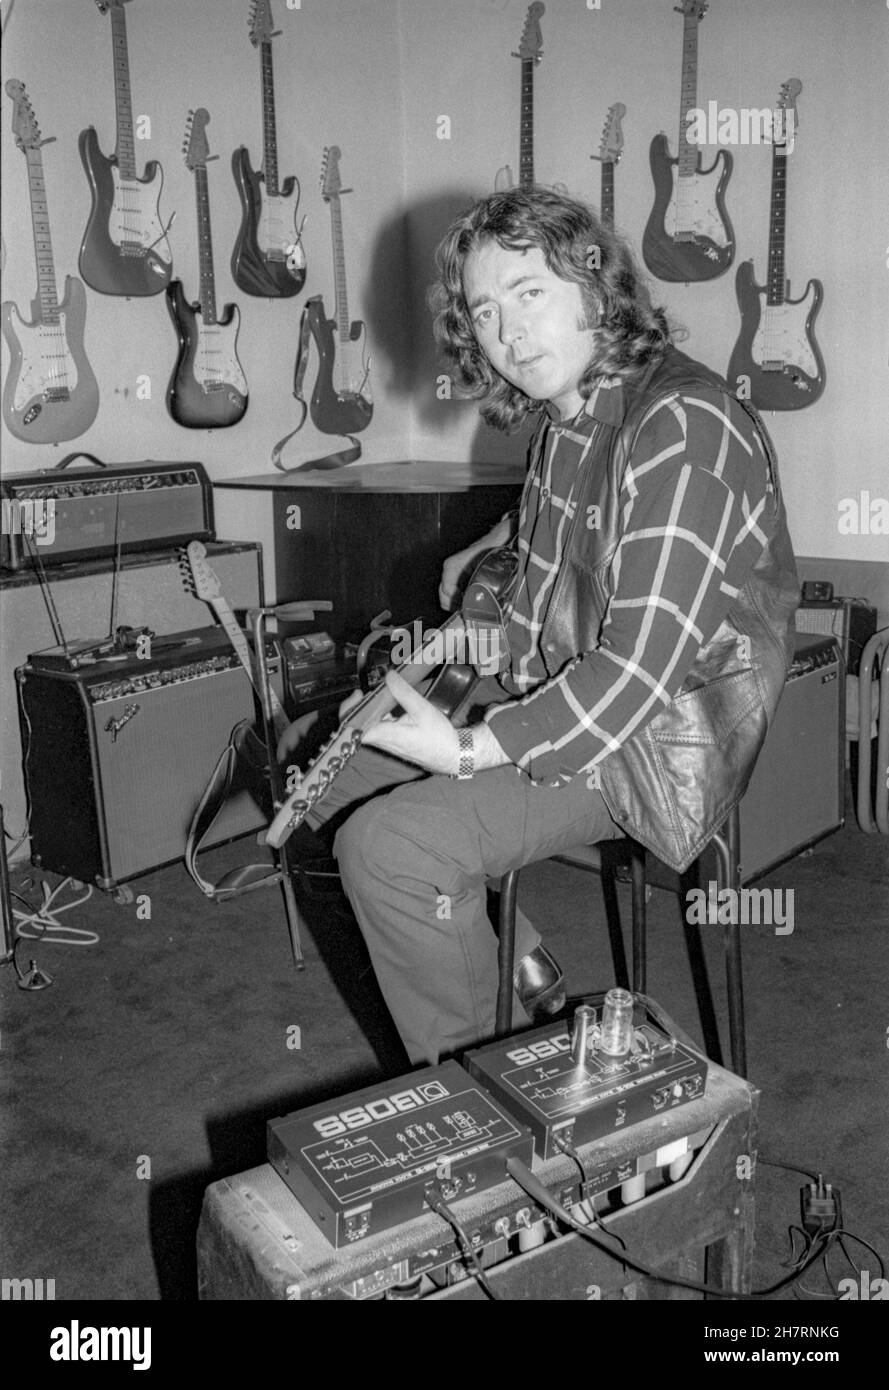 Irish blues/rock guitarist and singer Rory Gallagher trying out new equipment at Nomis Studios in West London, England on 11 July 1989. Stock Photo